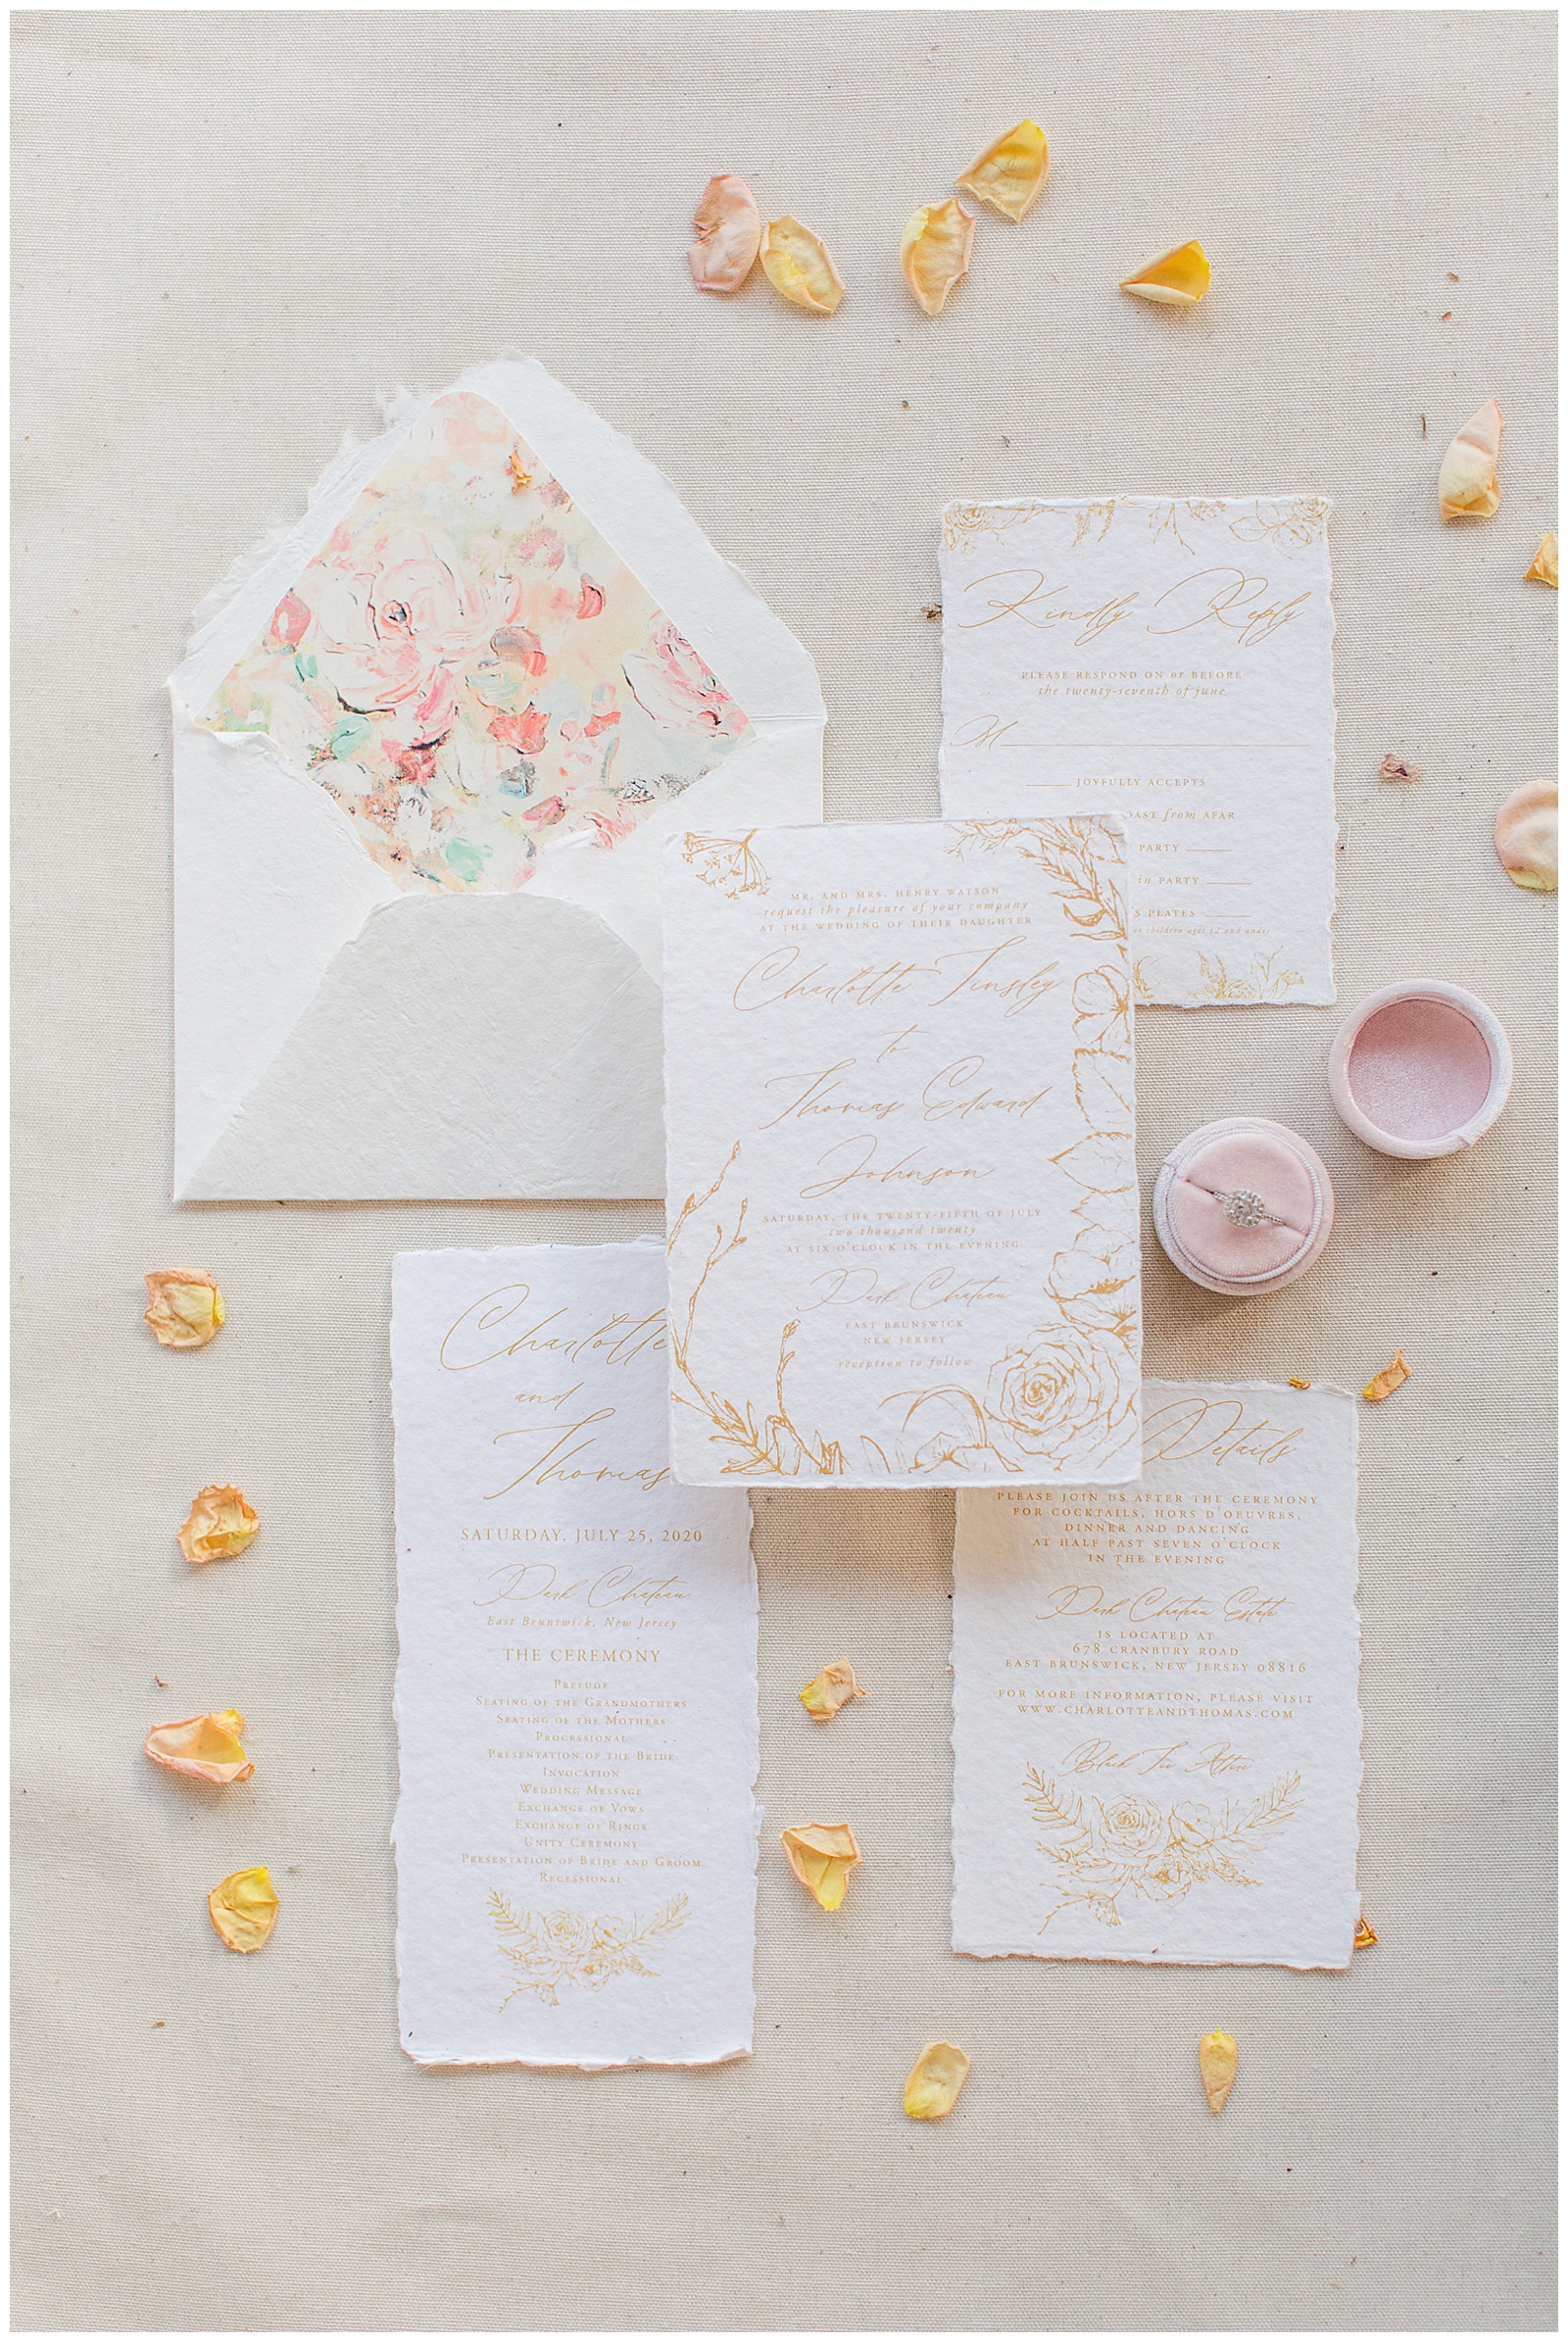 wedding invitations and details 